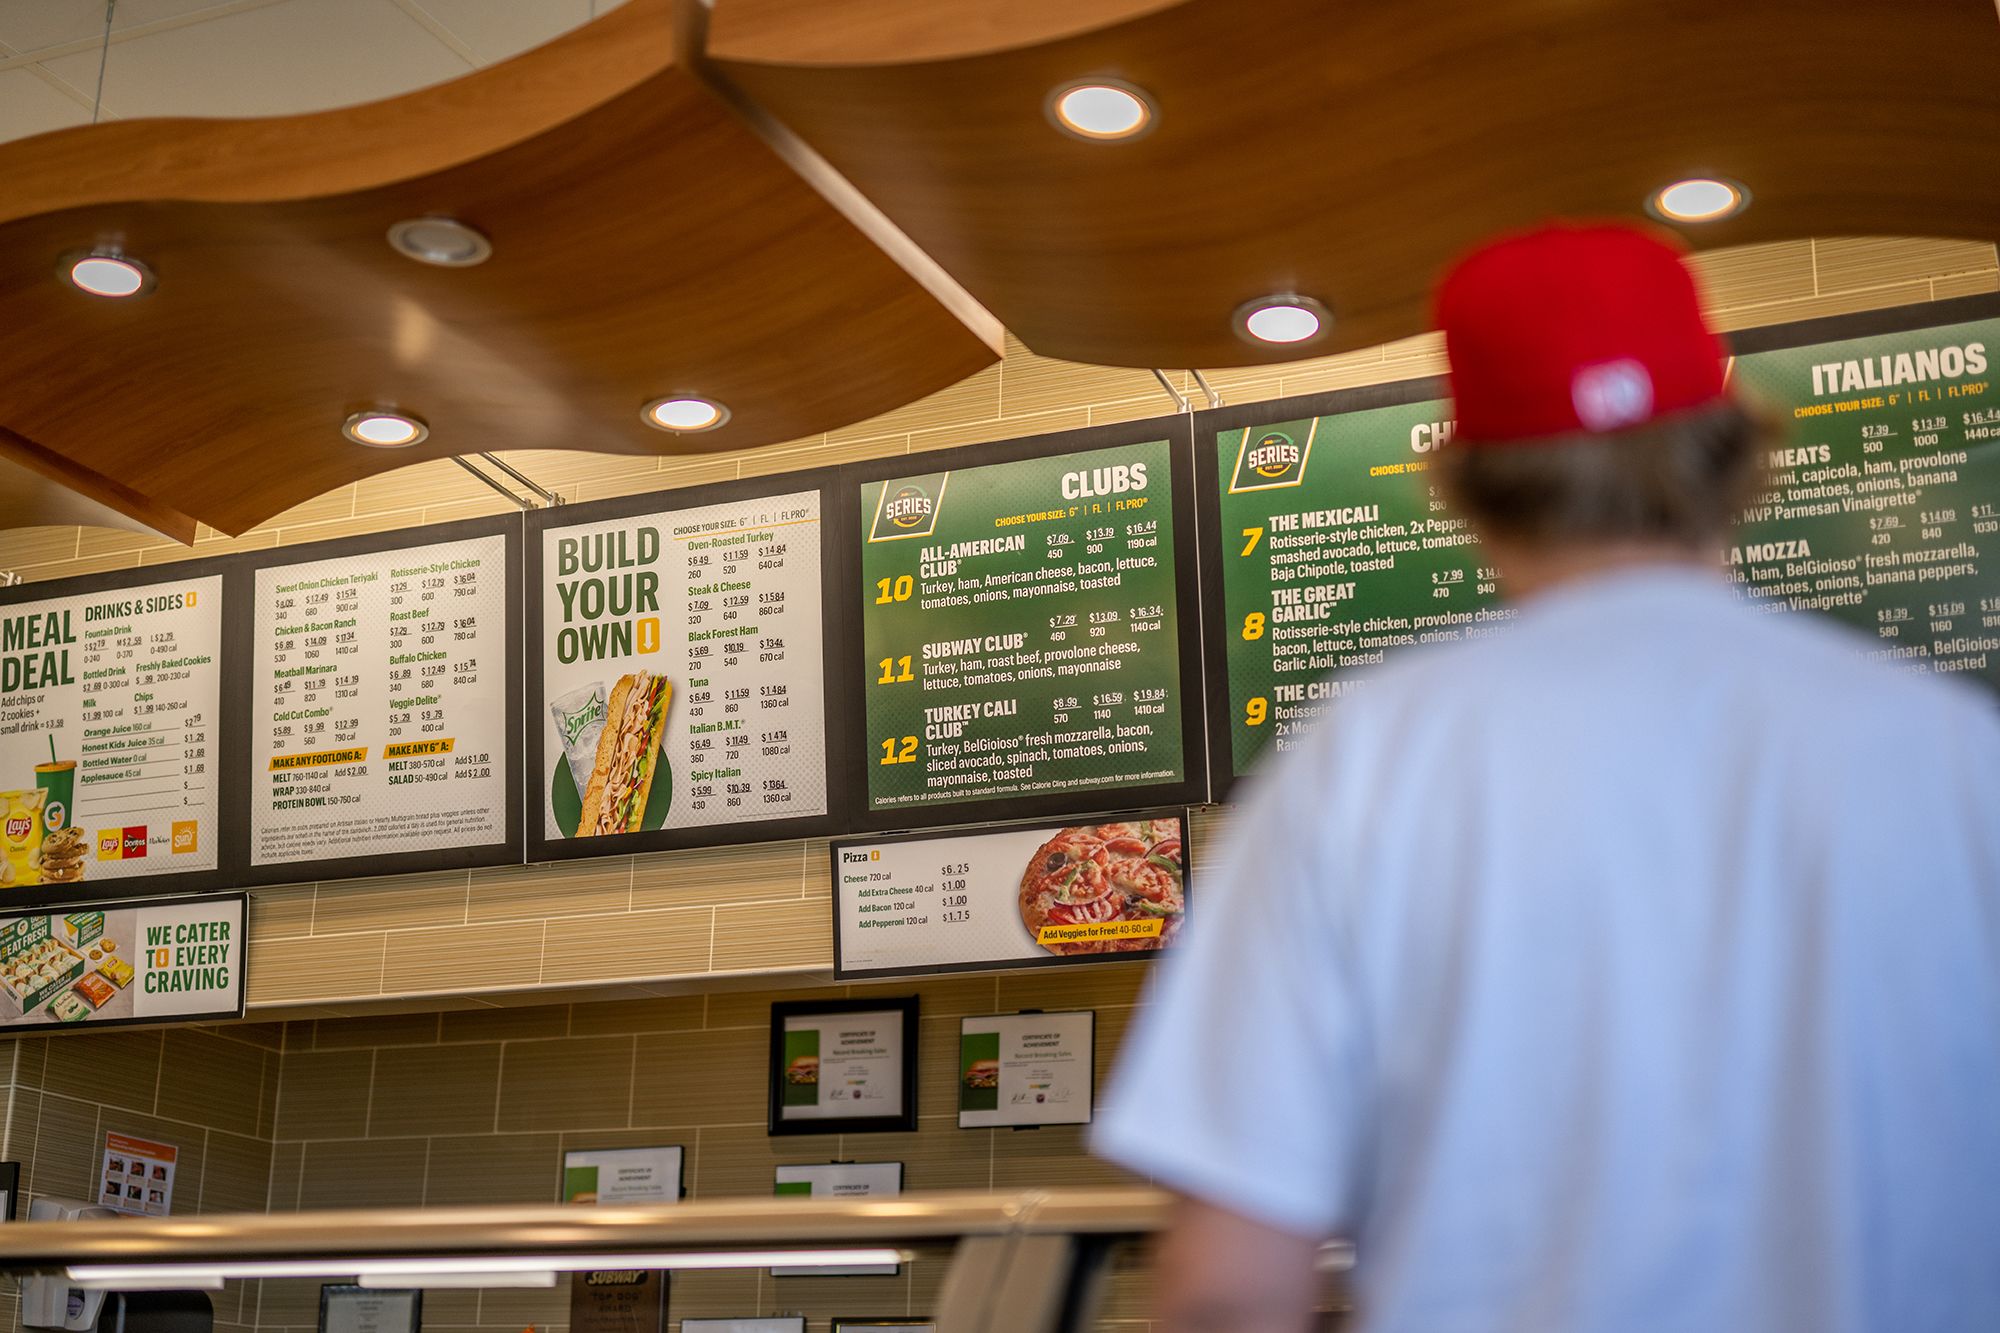 Subway closes shops, adds new menu items as part of business plan revamp -  Chicago Sun-Times